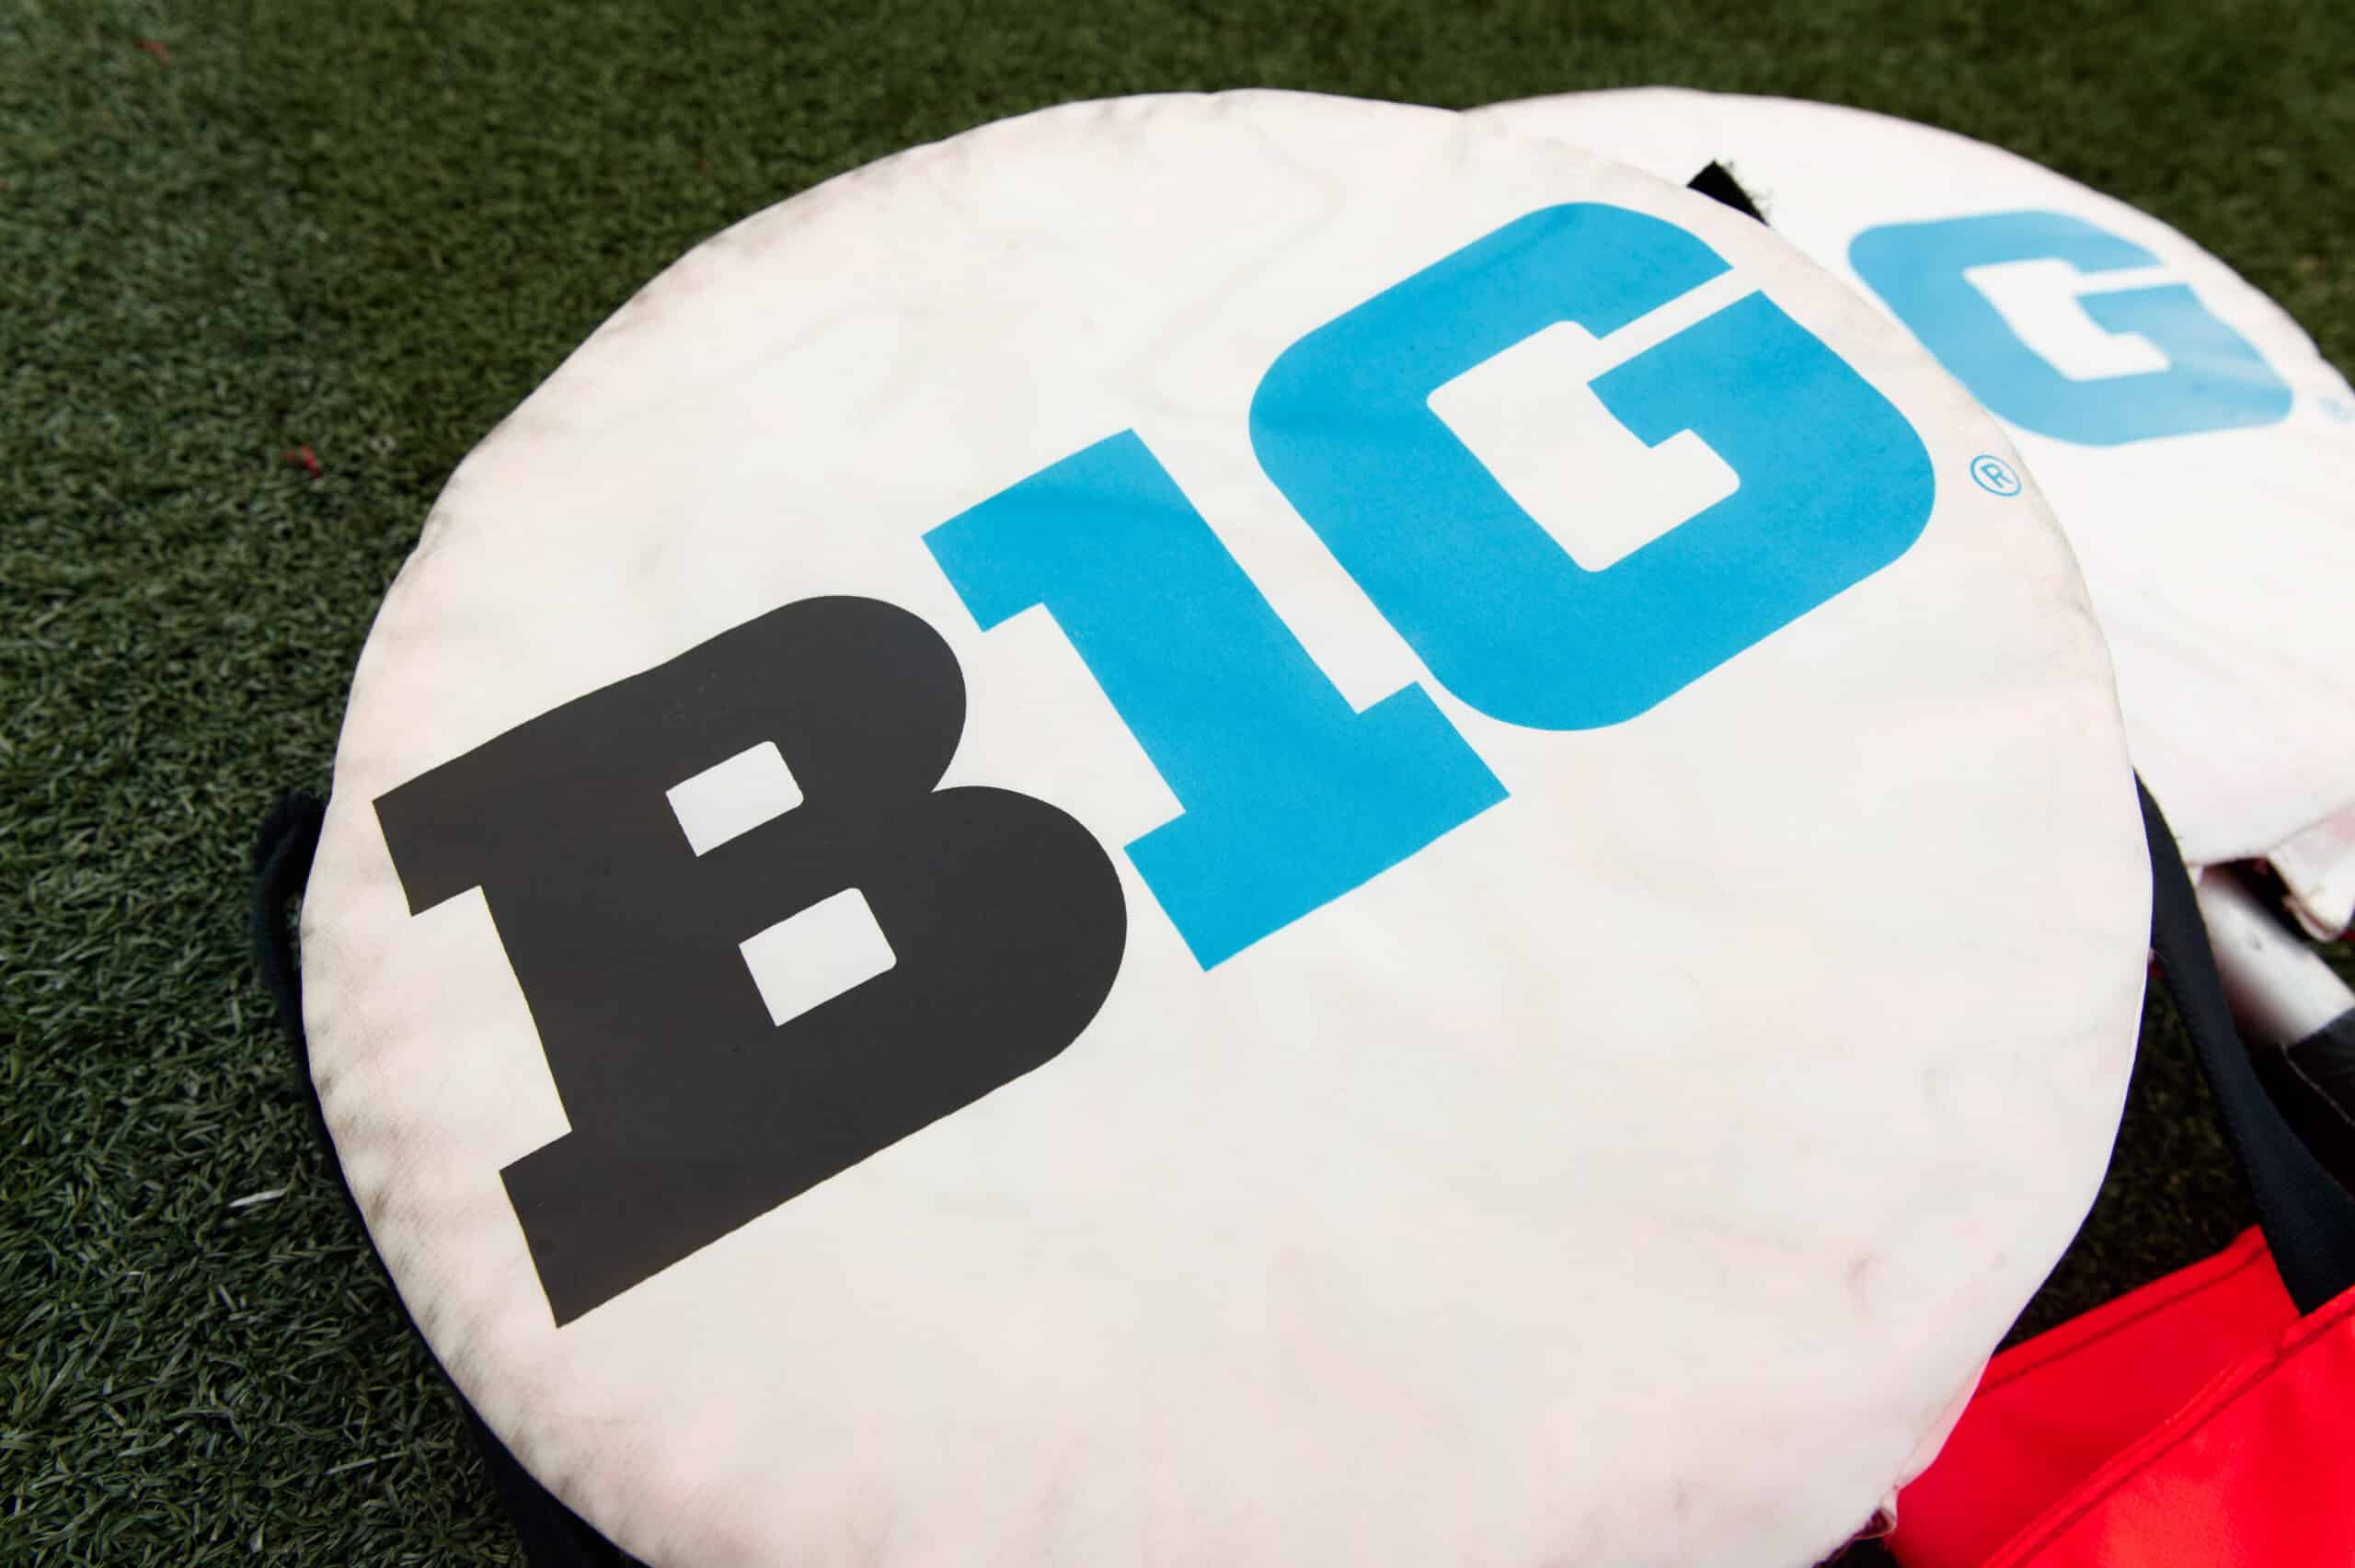 Sep 4, 2021; Madison, Wisconsin, USA; The Big 10 logo atop yardage markers on the sidelines prior to the game between the Penn State Nittany Lions and Wisconsin Badgers at Camp Randall Stadium.